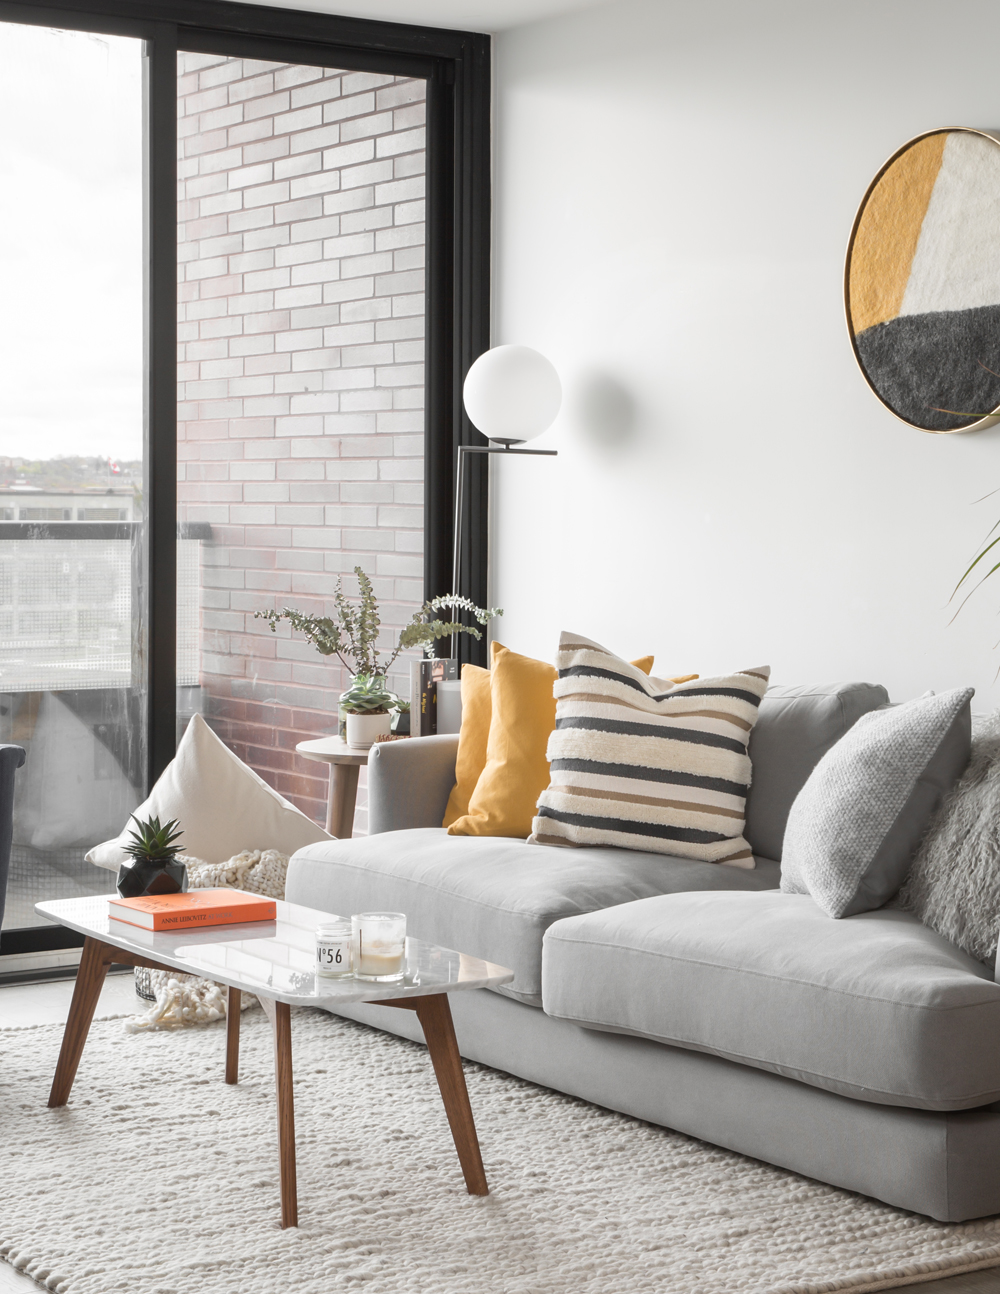 corner of condo with grey sofa, two mustard cushions on it, round bulb floor lamp in corner